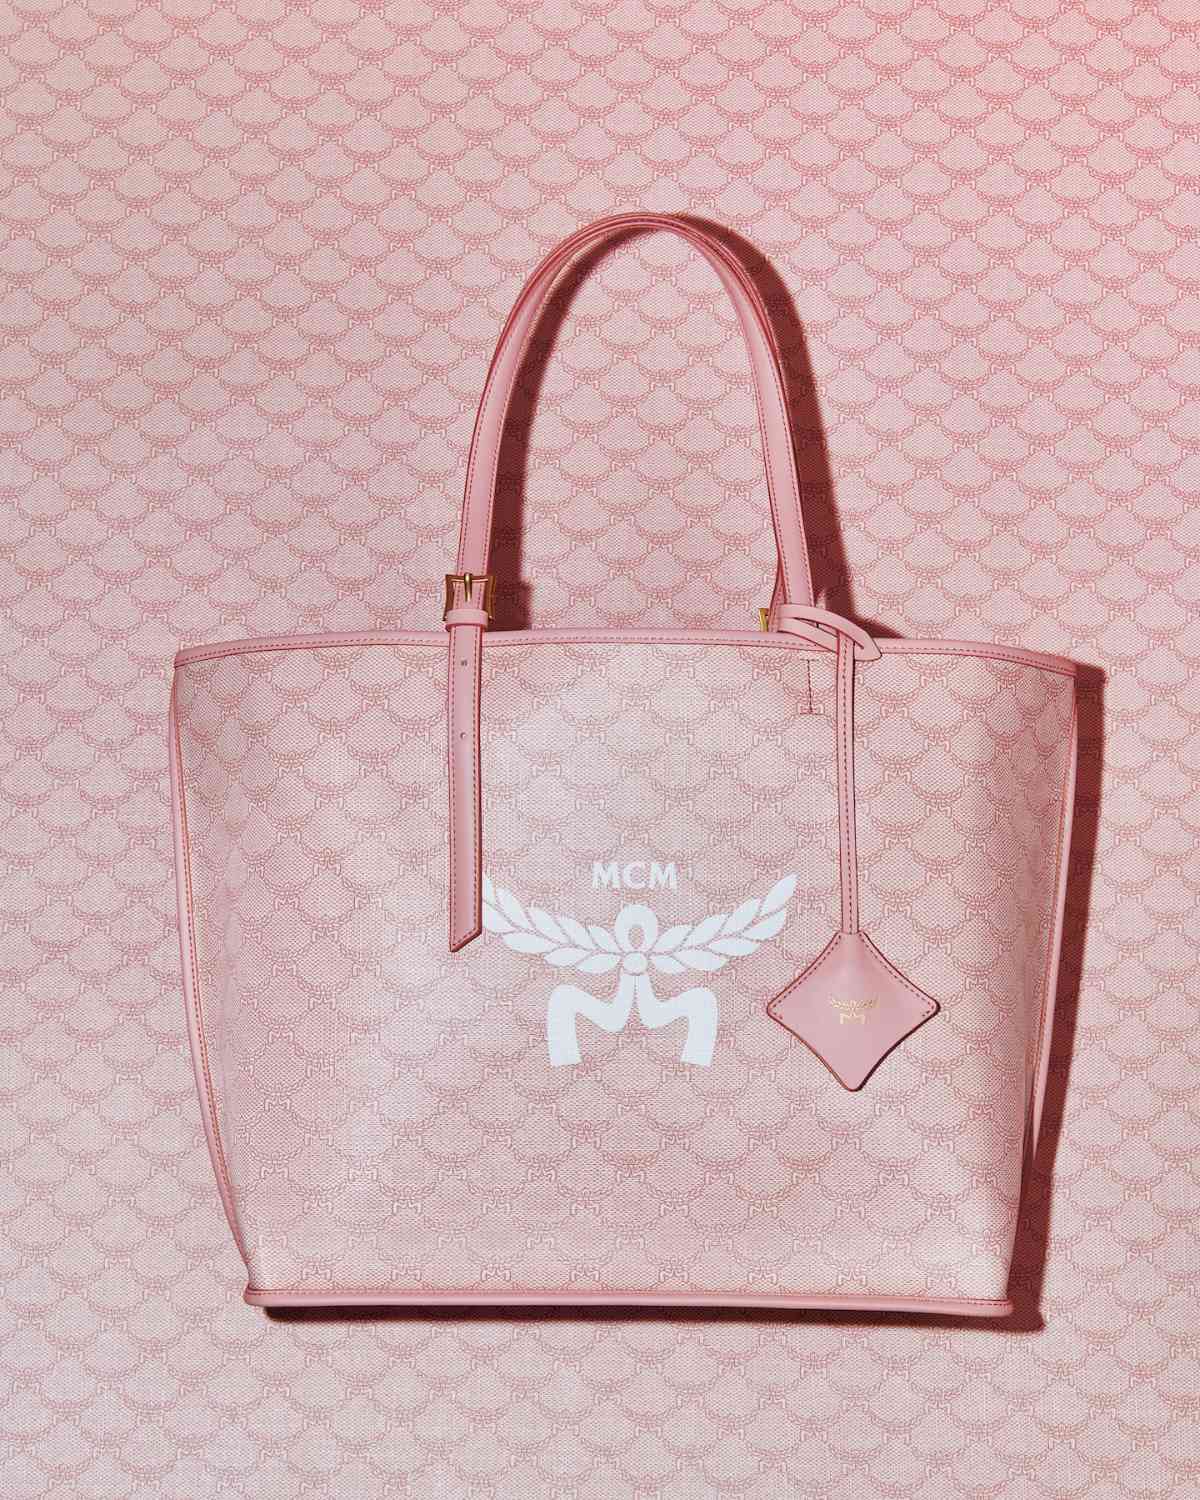 MCM Presents Its New Lauretos Monogram In The Pink Color